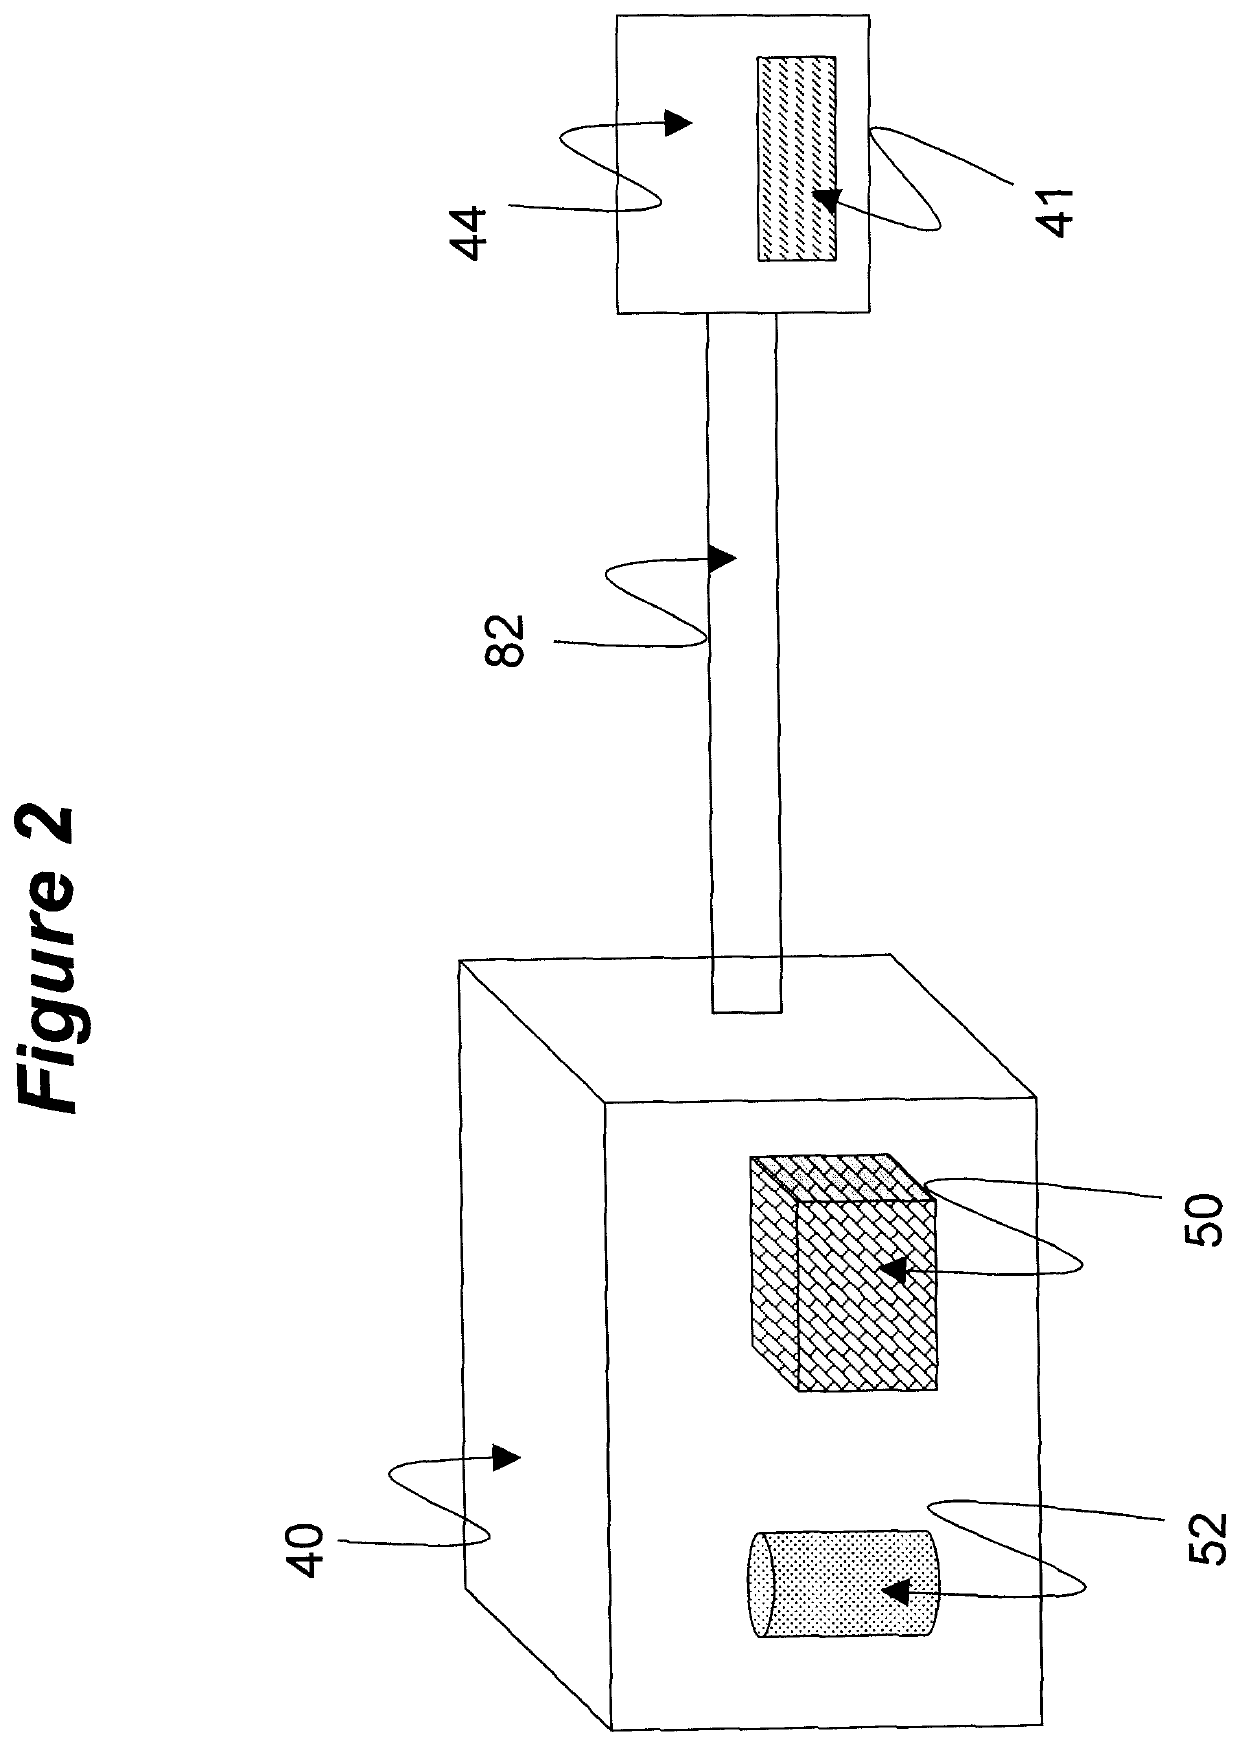 Droplet microfluidic device and methods of sensing the results of an assay therein